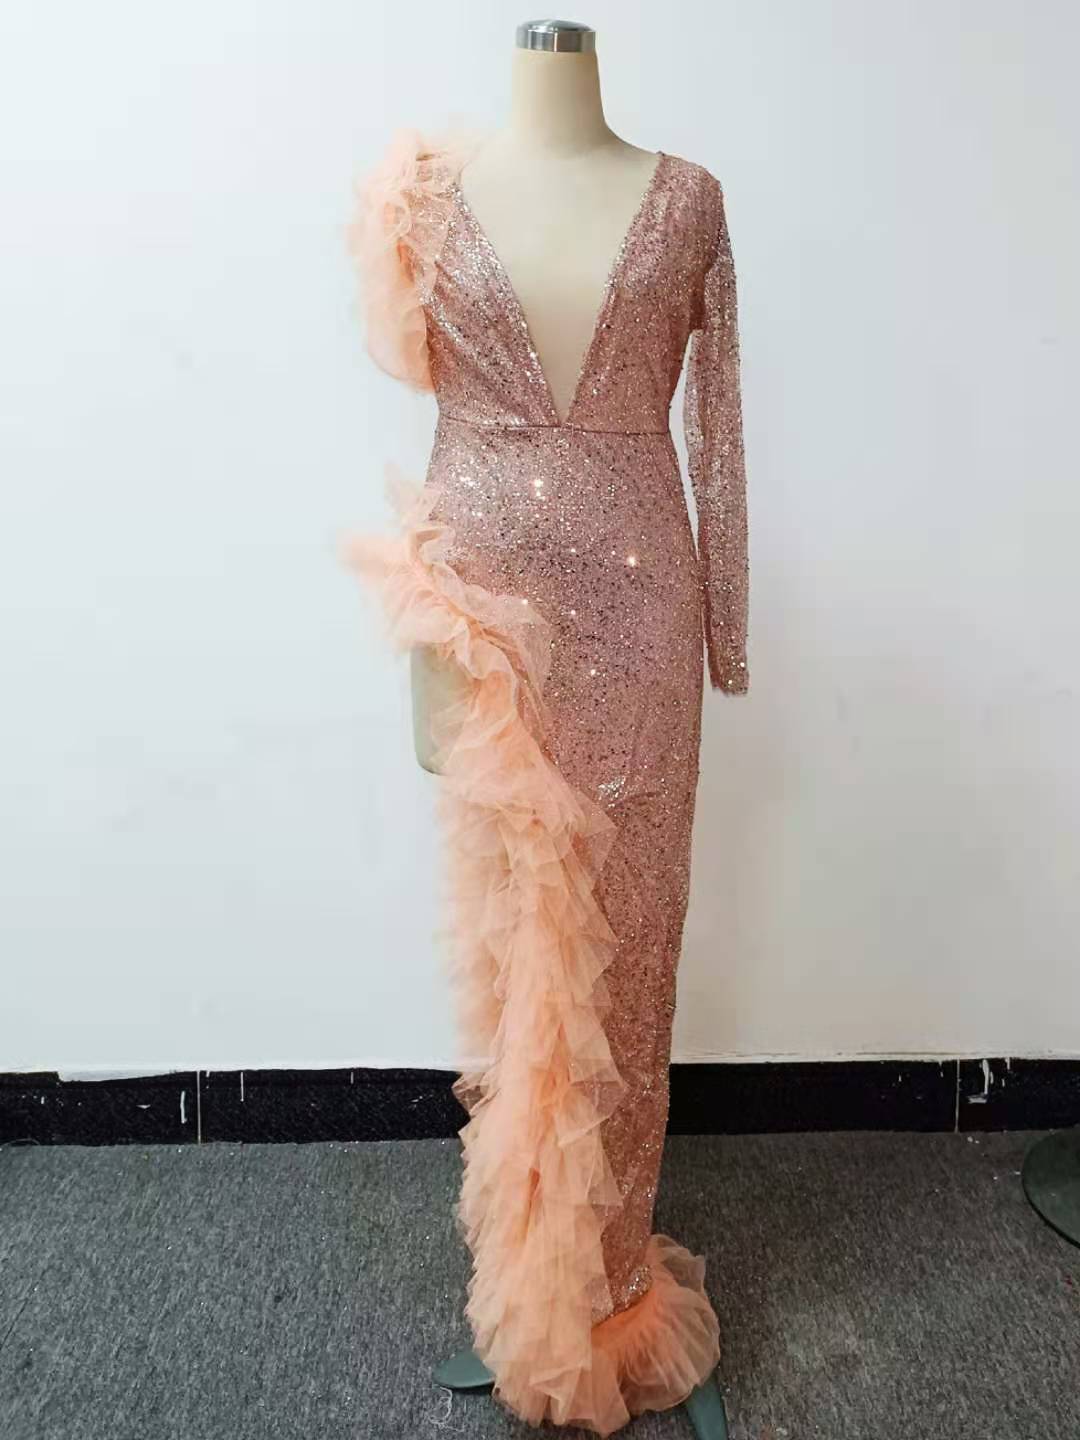 Fancy Dresses | Pink Feather and Glitter Rhinestone Evening Dress